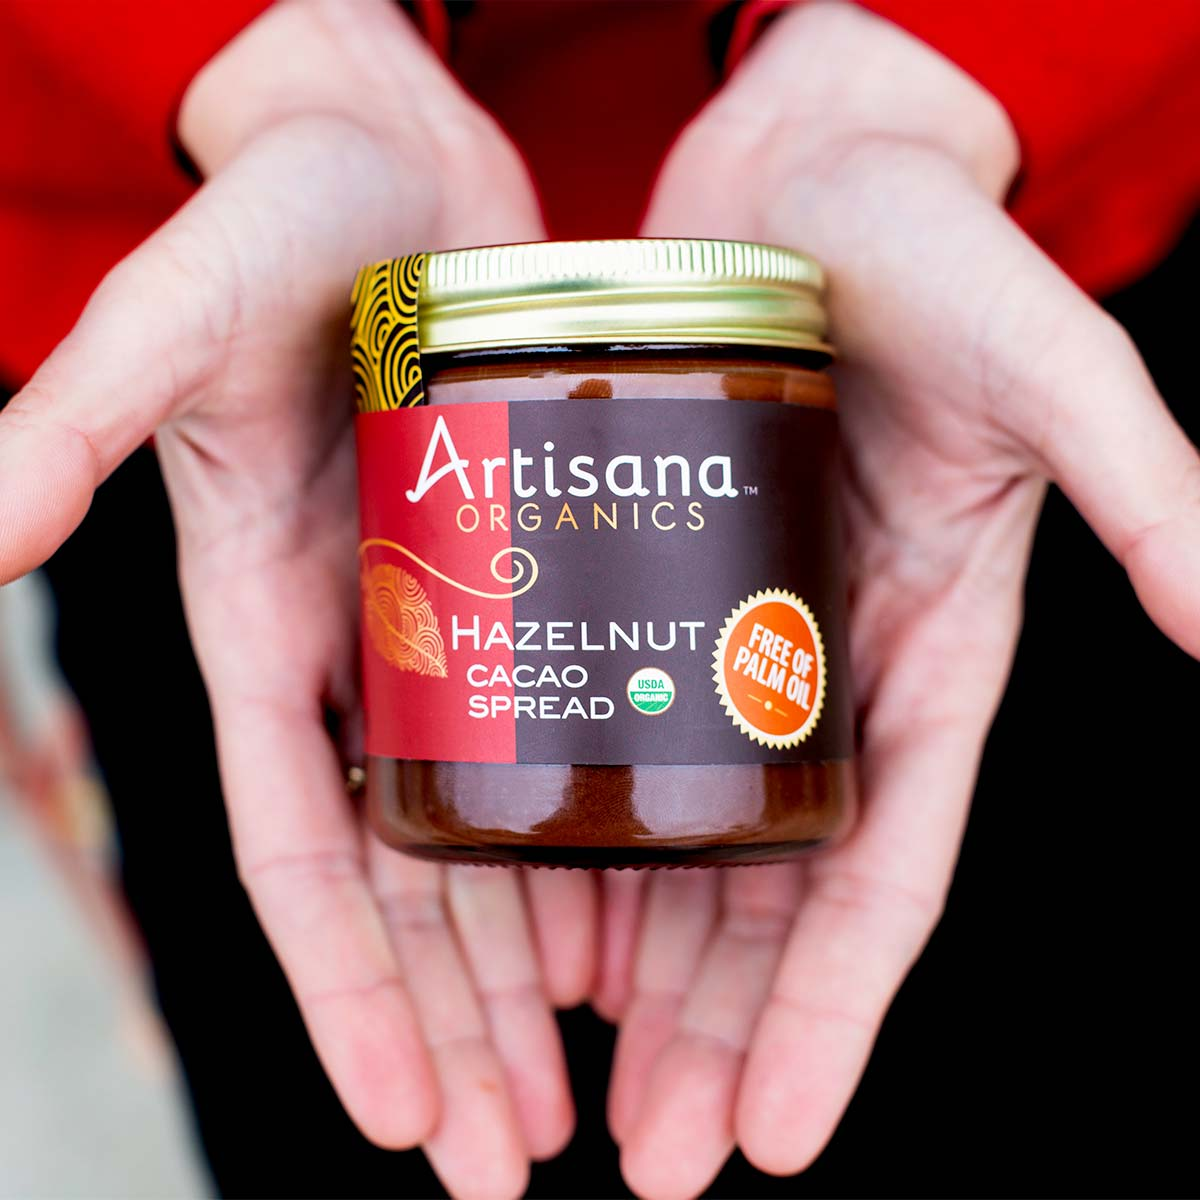 Jar of Hazelnut Cacao Spread held in a person's hands